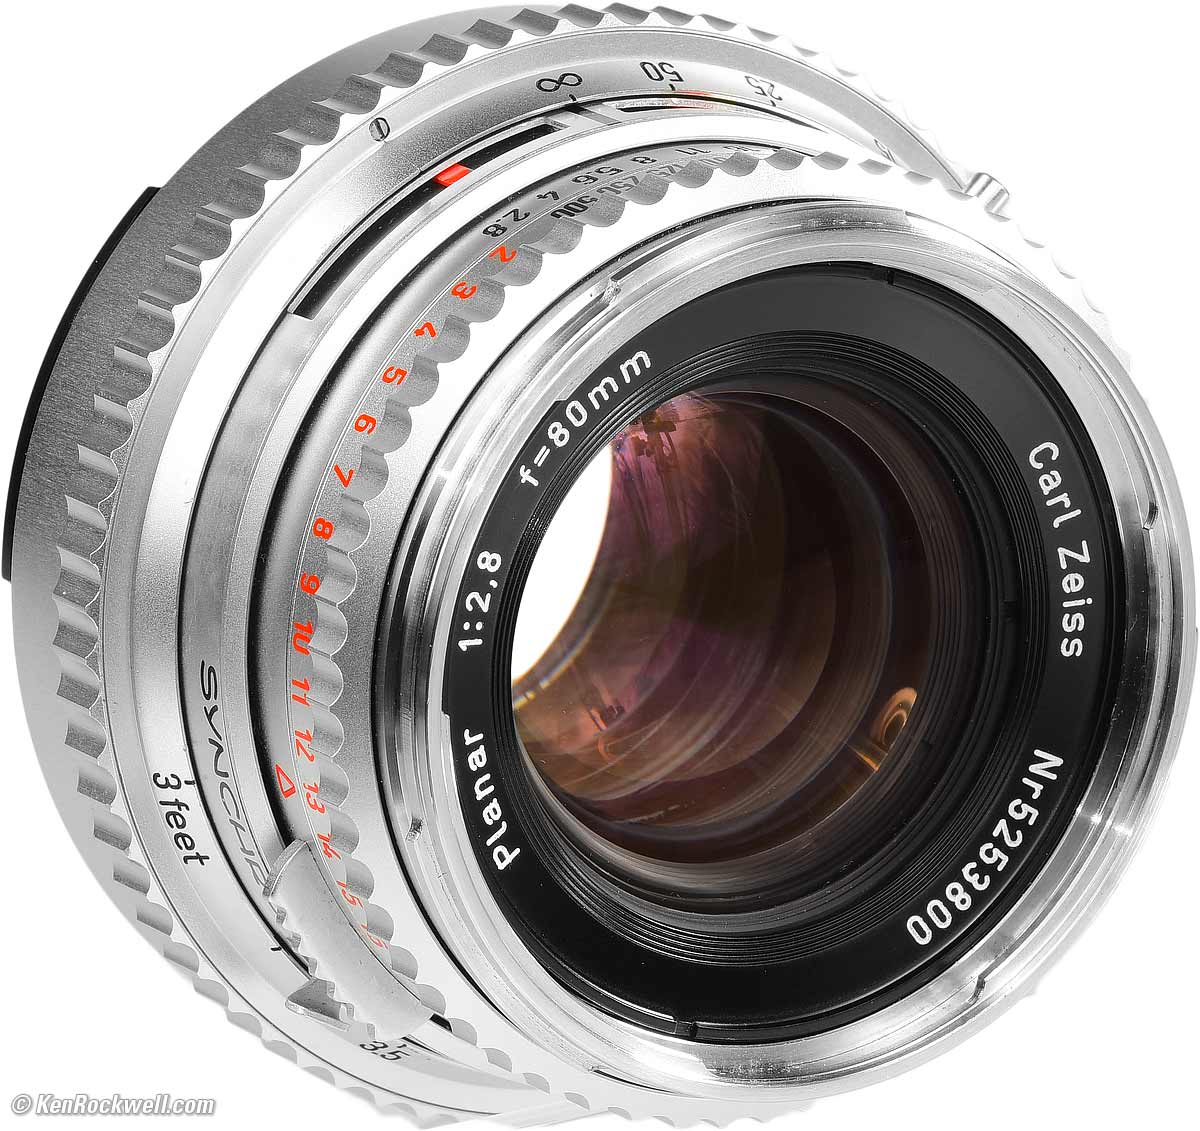 Hasselblad Zeiss Planar 80mm f/2.8 C Review